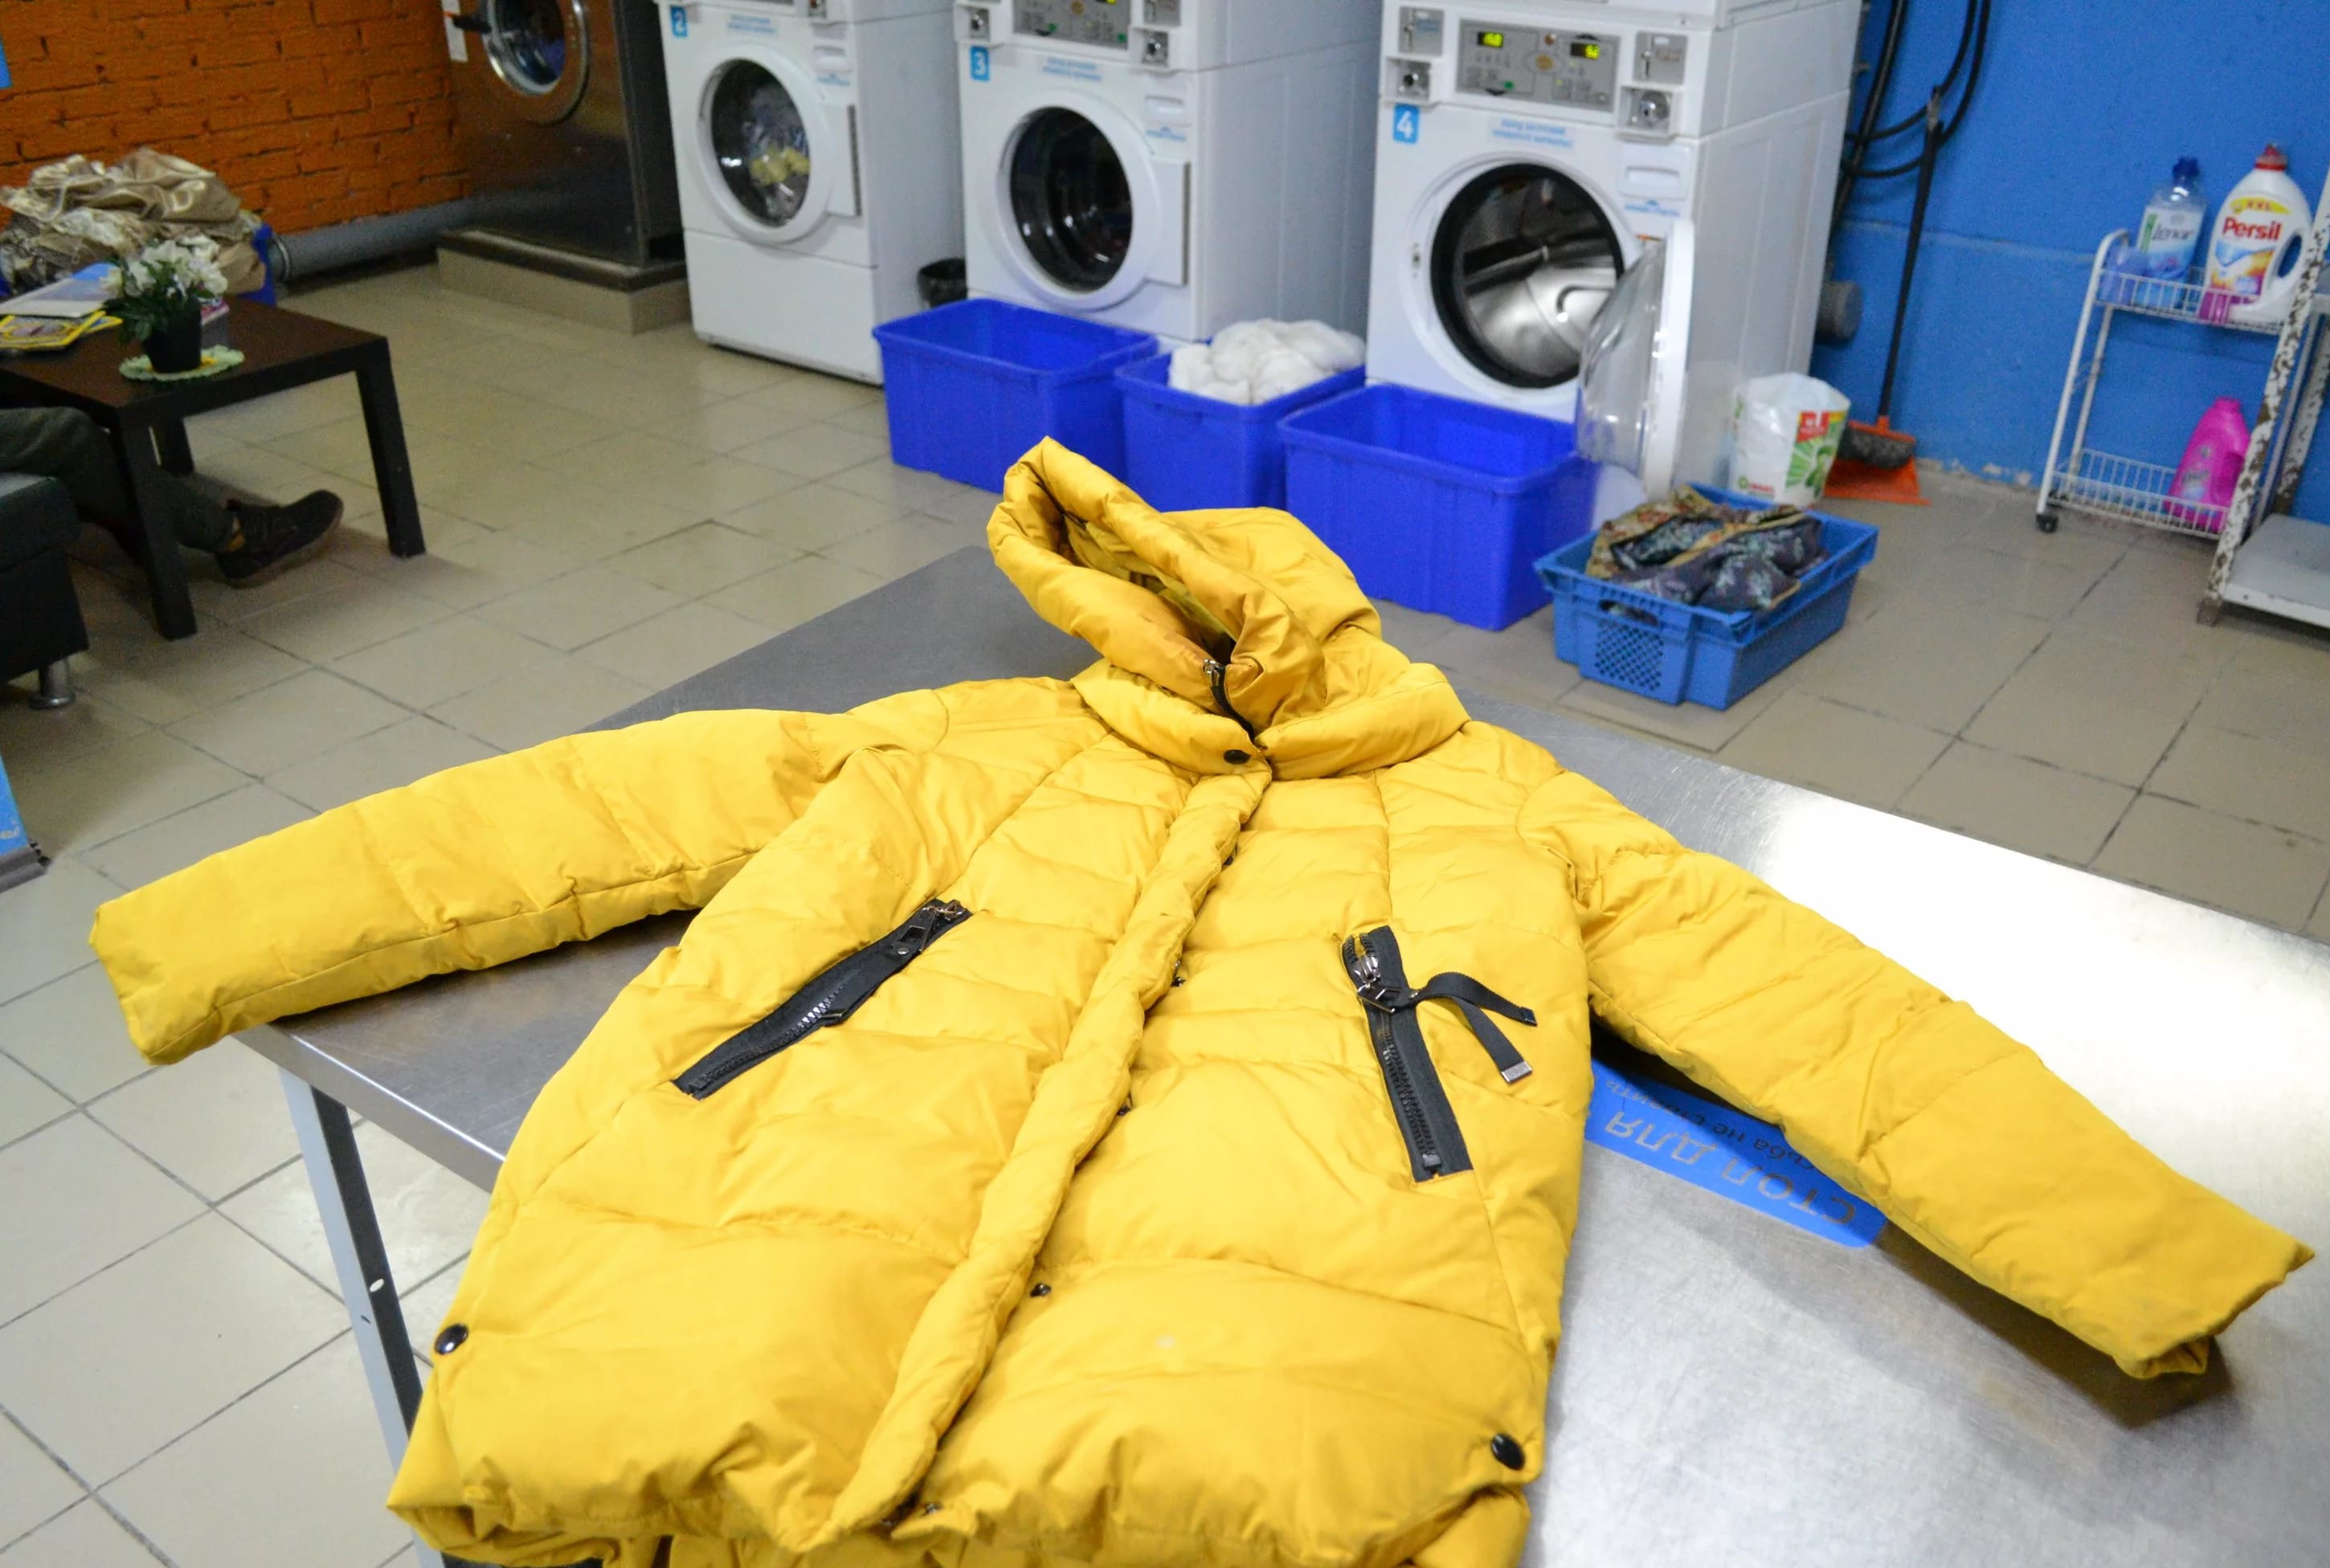 How to properly dry a down jacket after washing in a washing machine